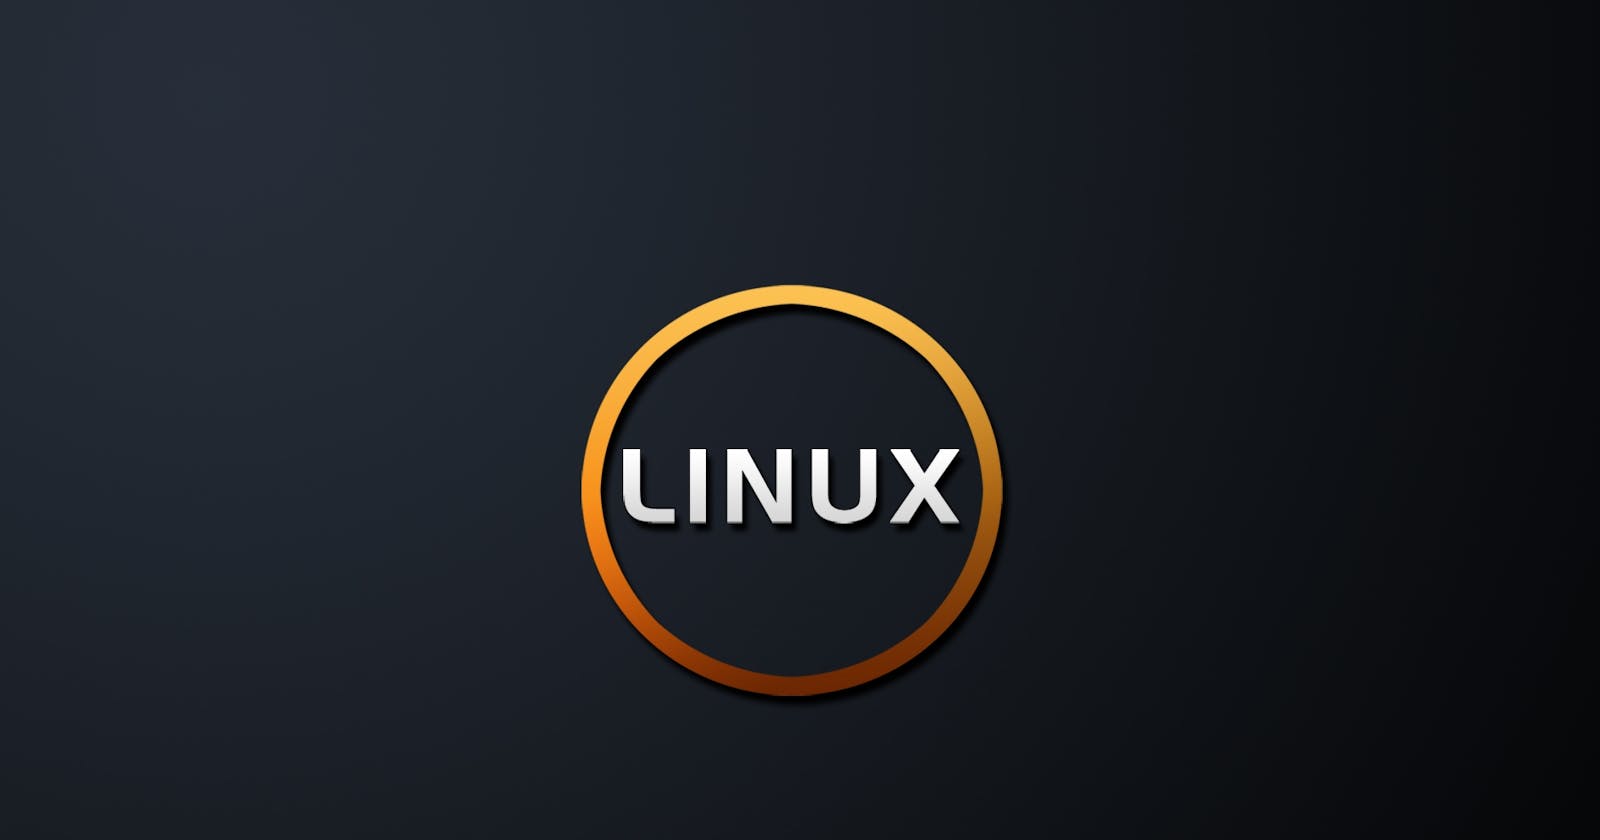 Basic Linux command and Discription